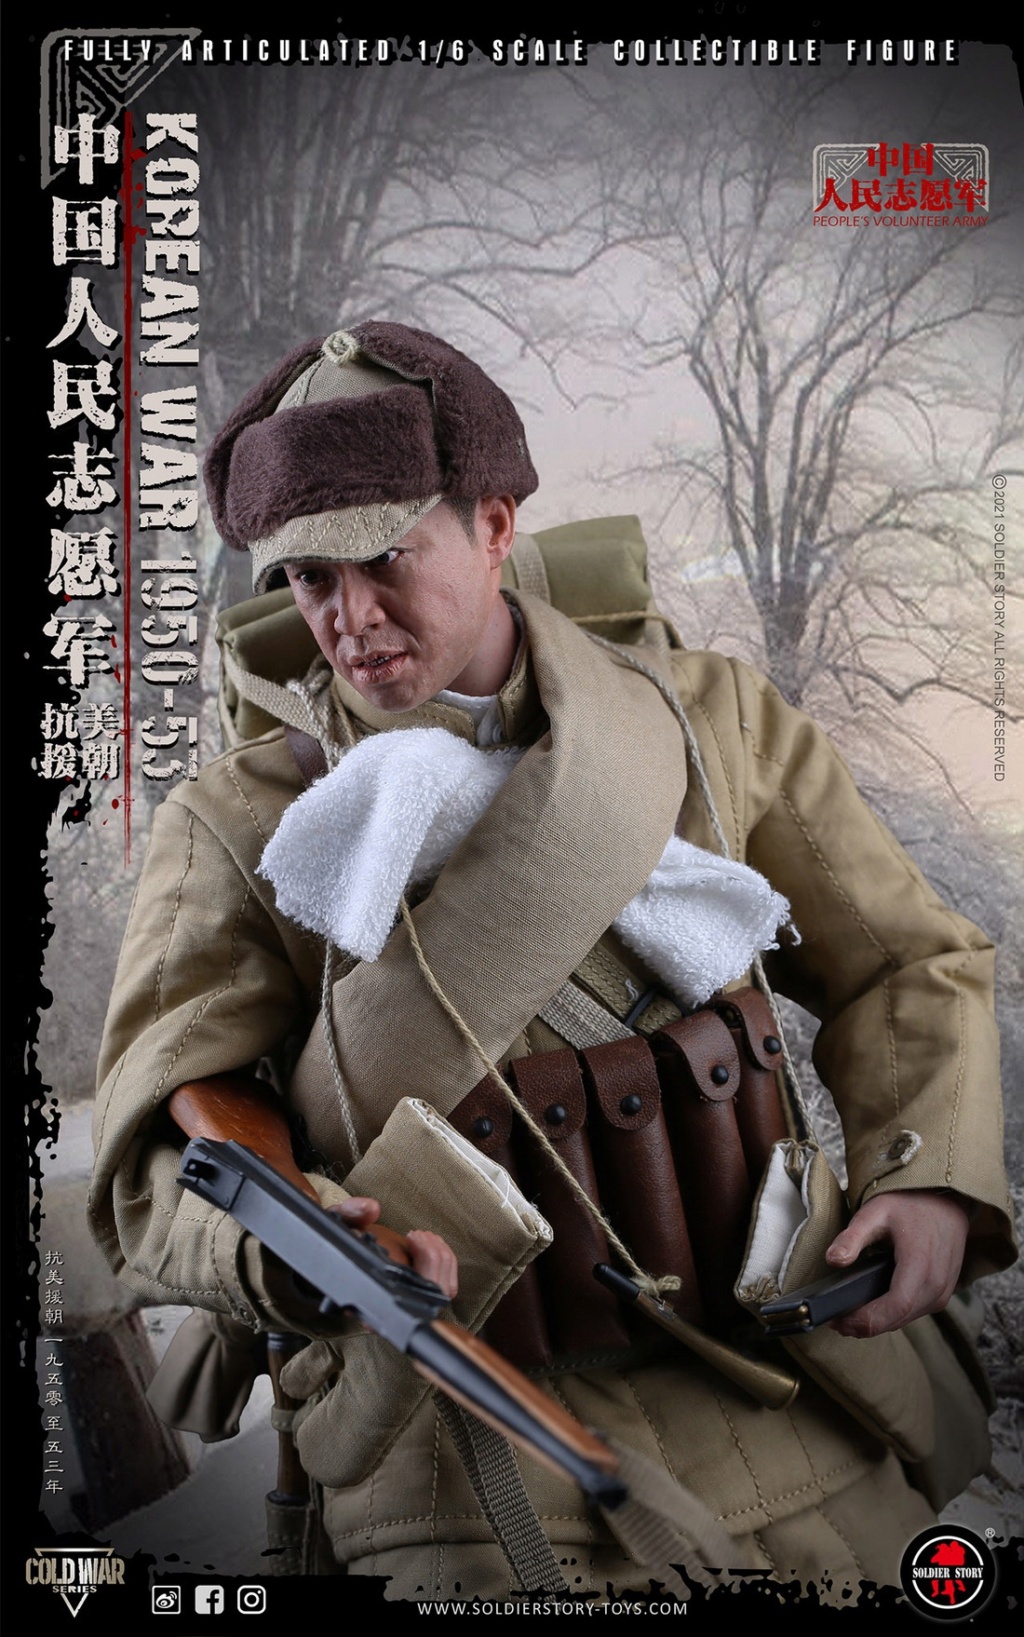 Soldierstory - NEW PRODUCT: SOLDIER STORY: 1/6 Chinese People’s Volunteers 1950-53 Collectible Action Figure (#SS-124) 22c77f10